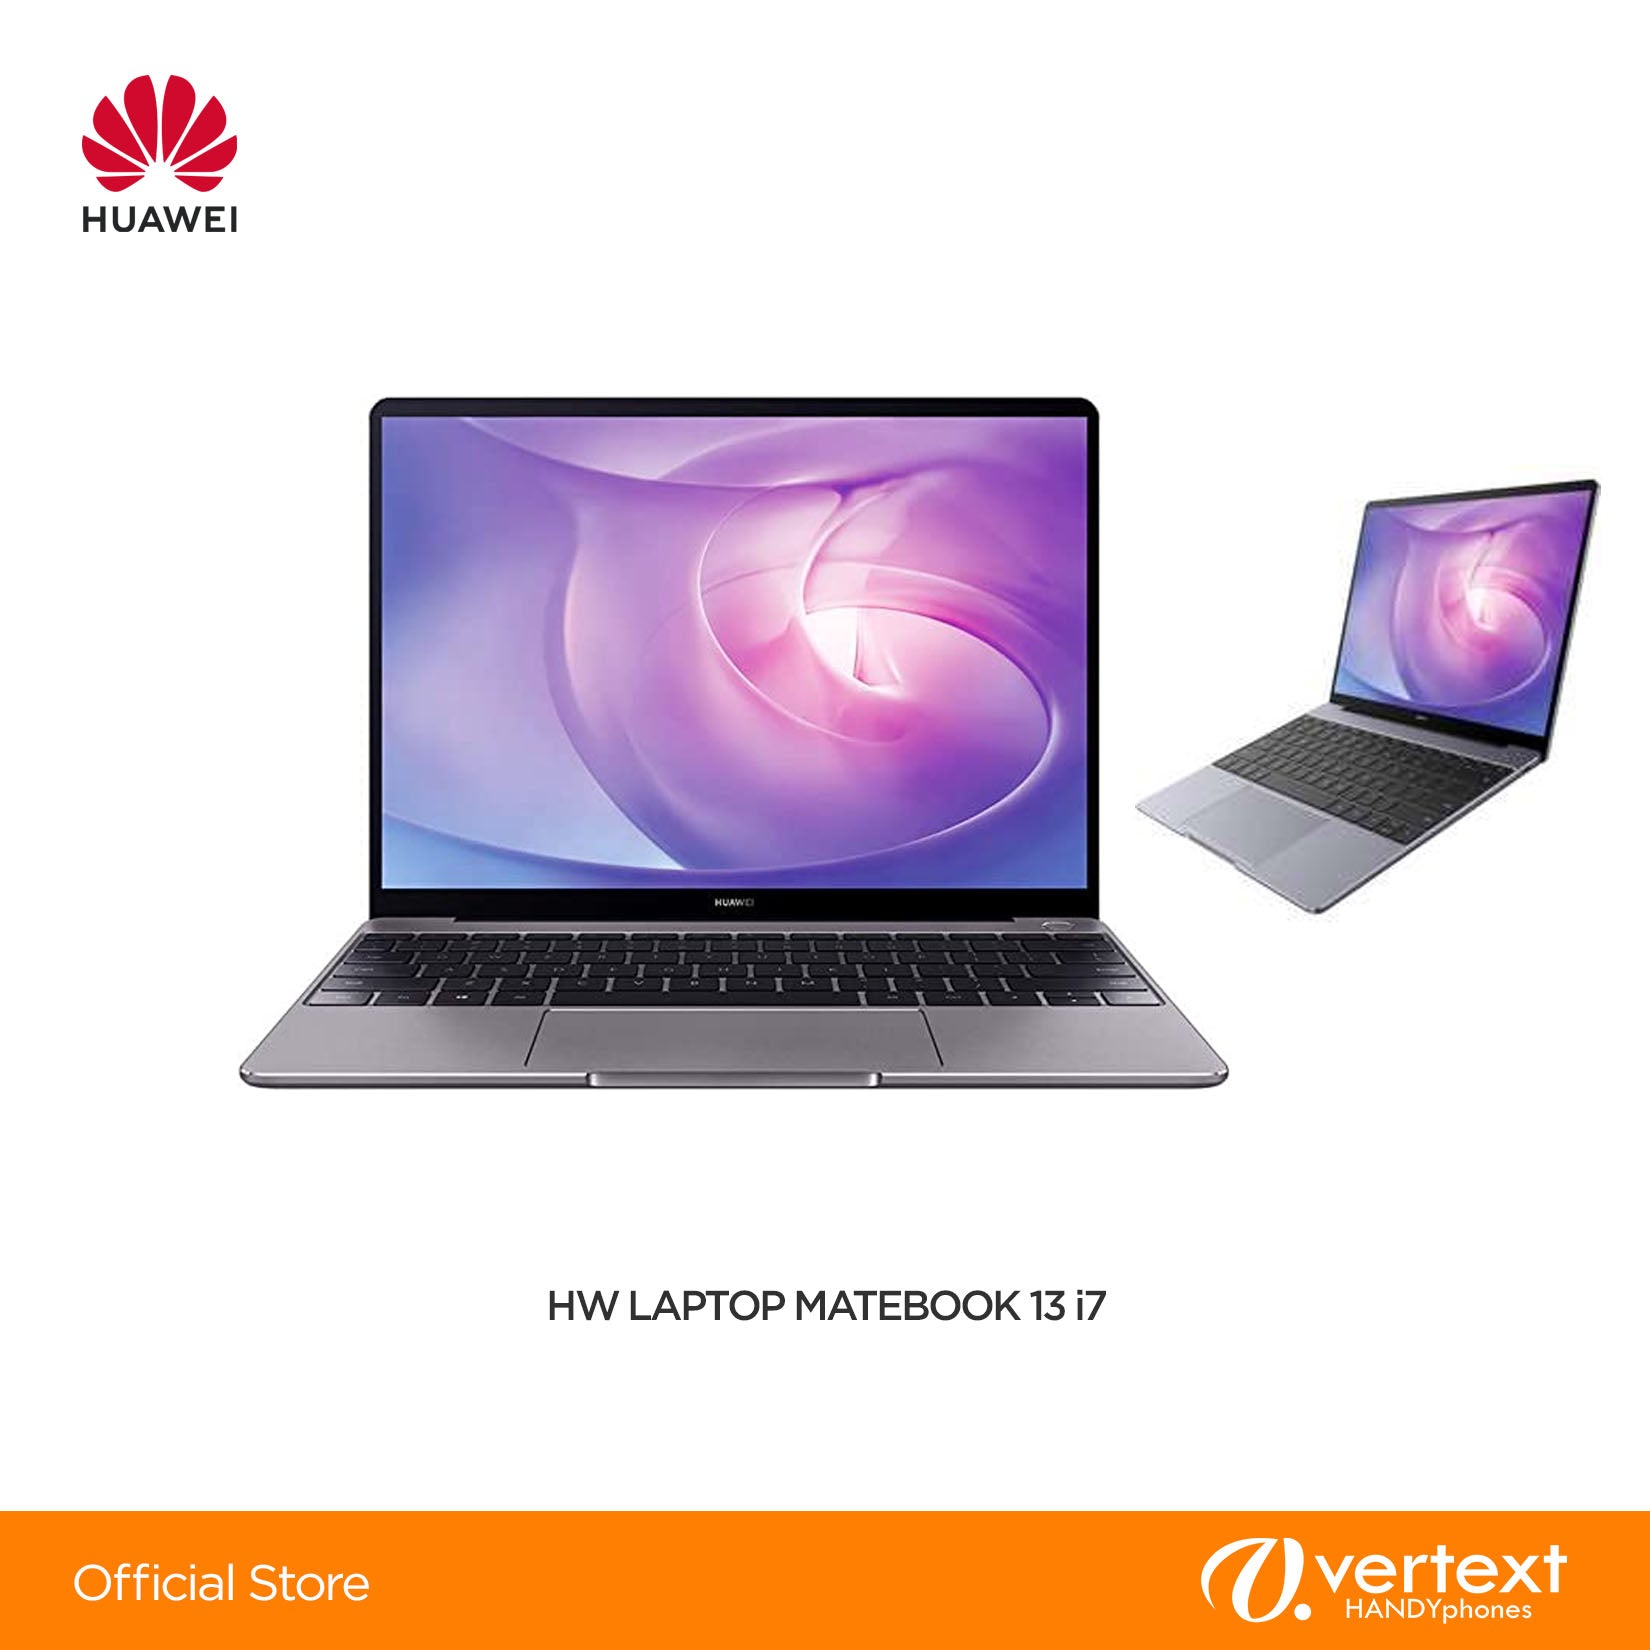 Huawei LAPTOP MATEBOOK 13 i7 13 INCHES